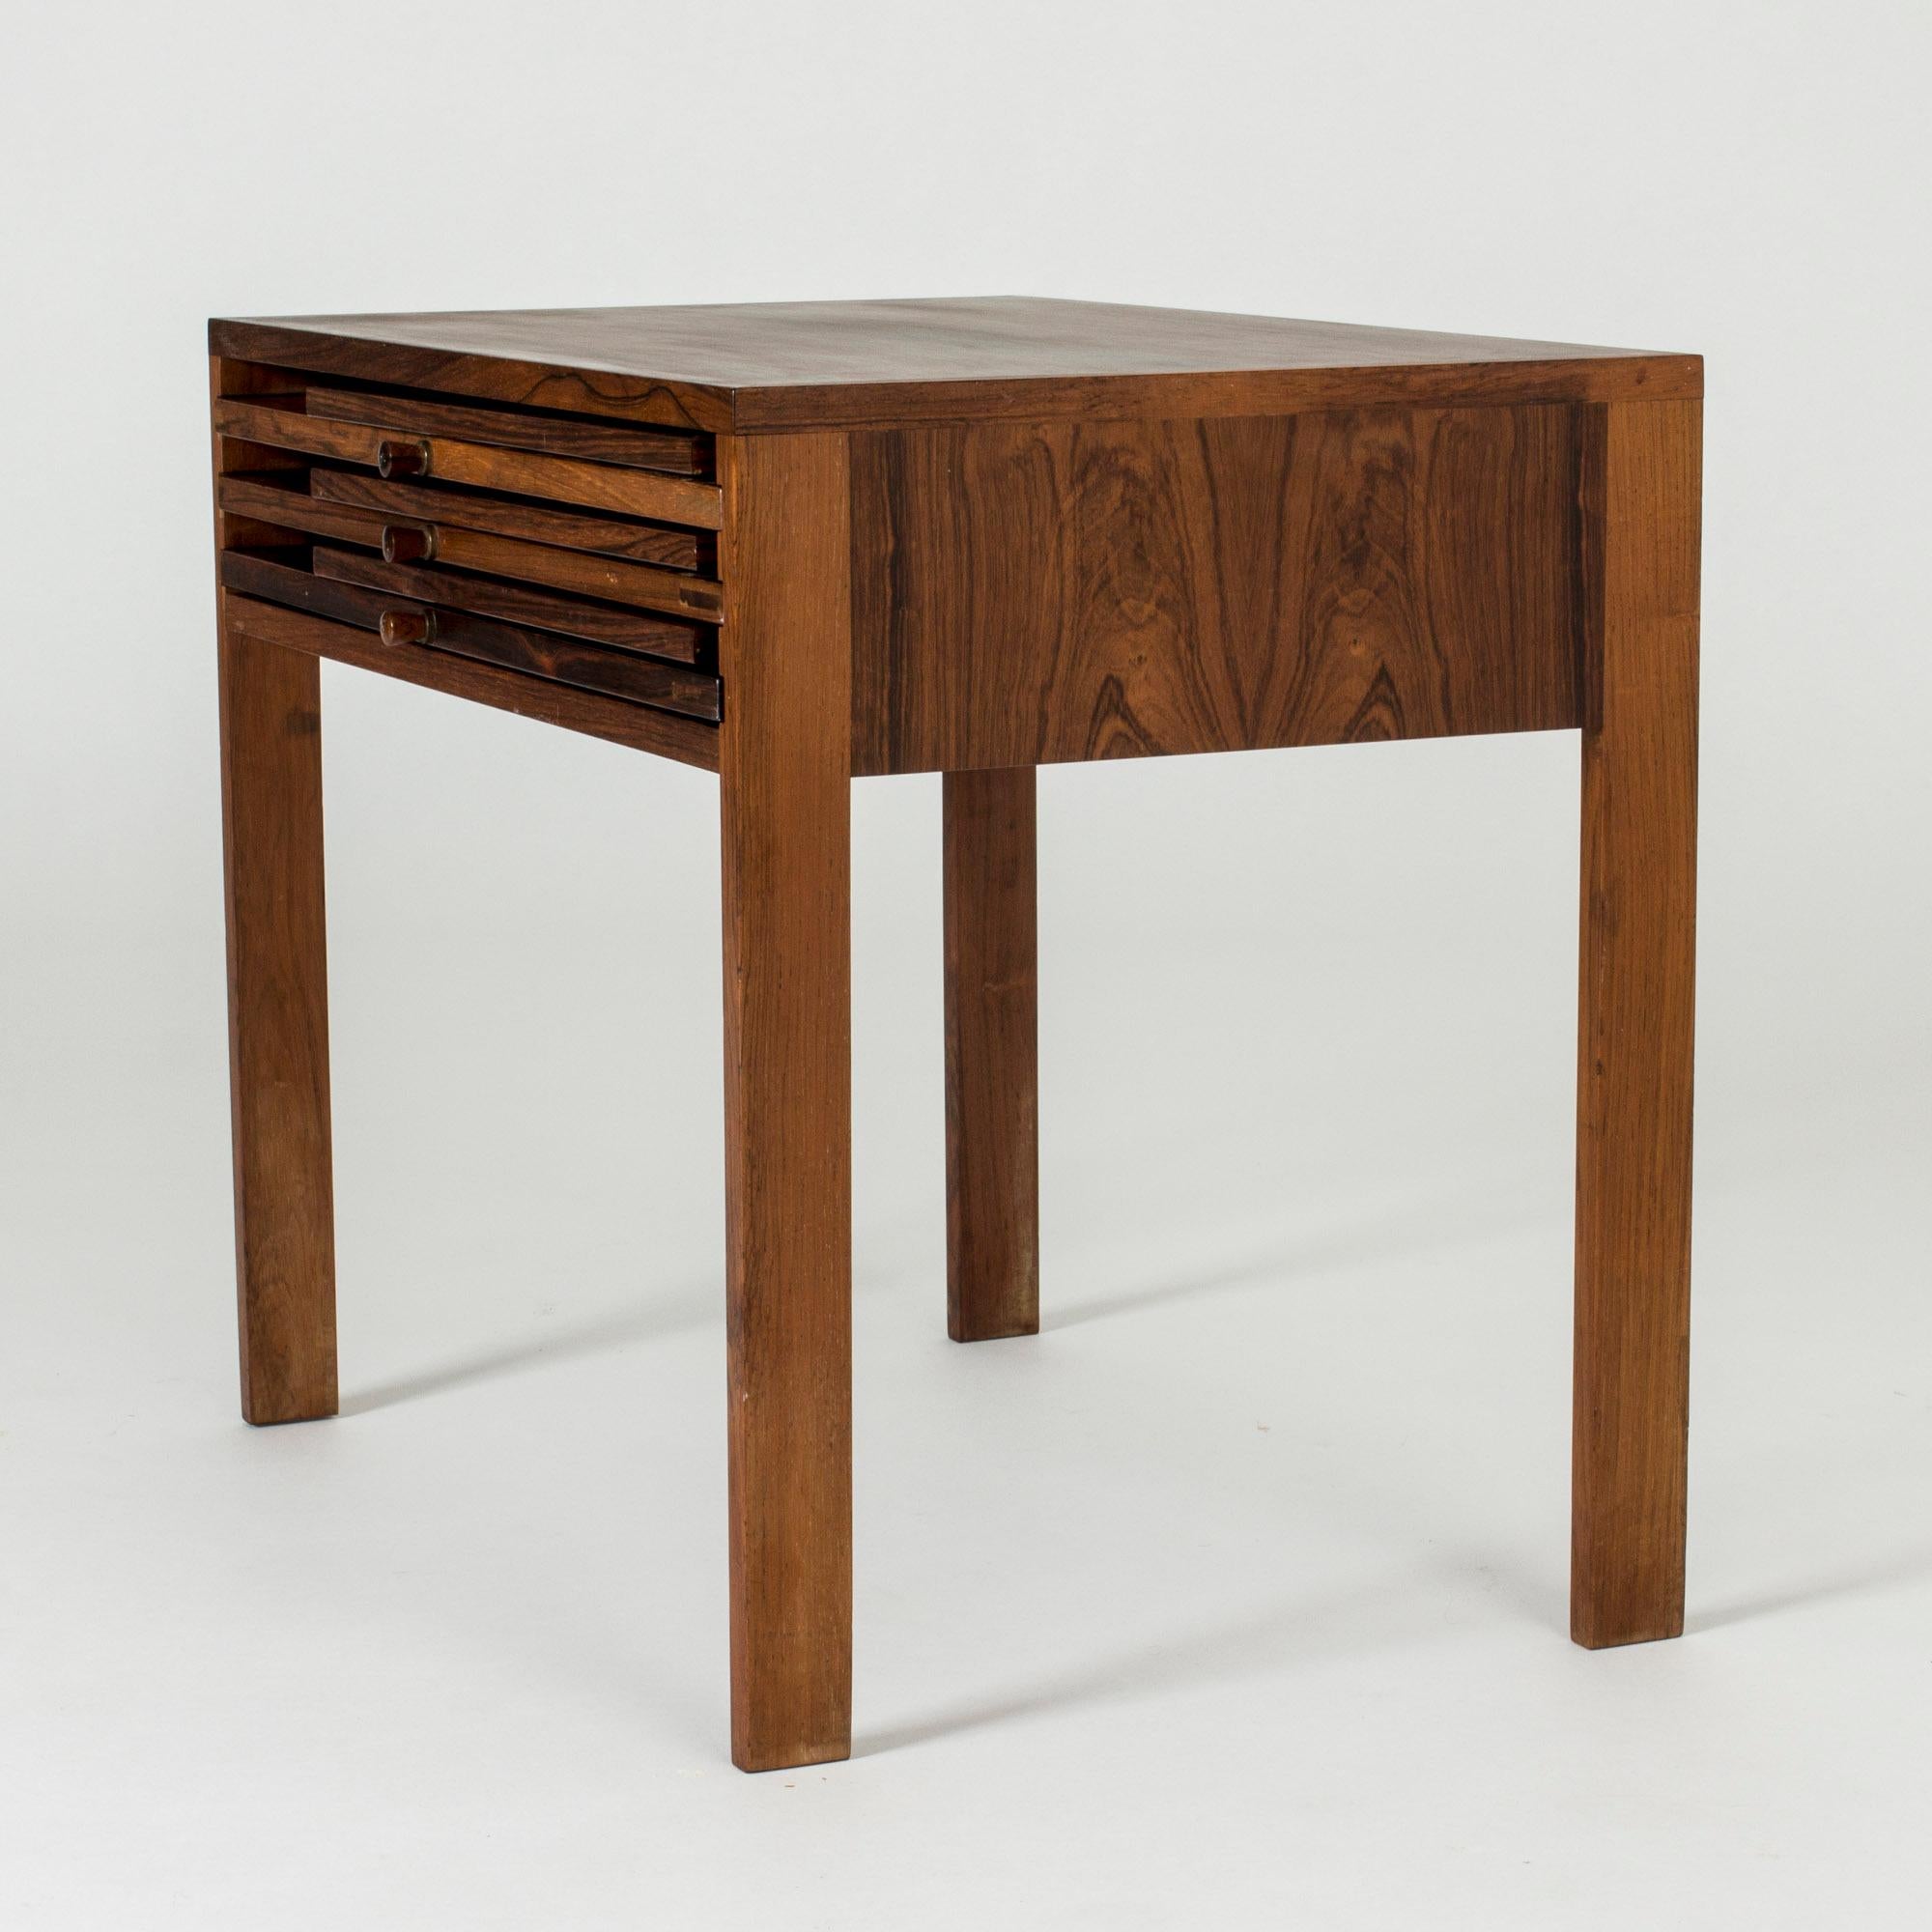 Rosewood nesting table in a clever and very elegant design by Illum Wikkelsø. Three small folding tables are stacked like cassettes inside the table and are pulled out with small knobs that also make a decorative detail. Very nice craftsmanship.